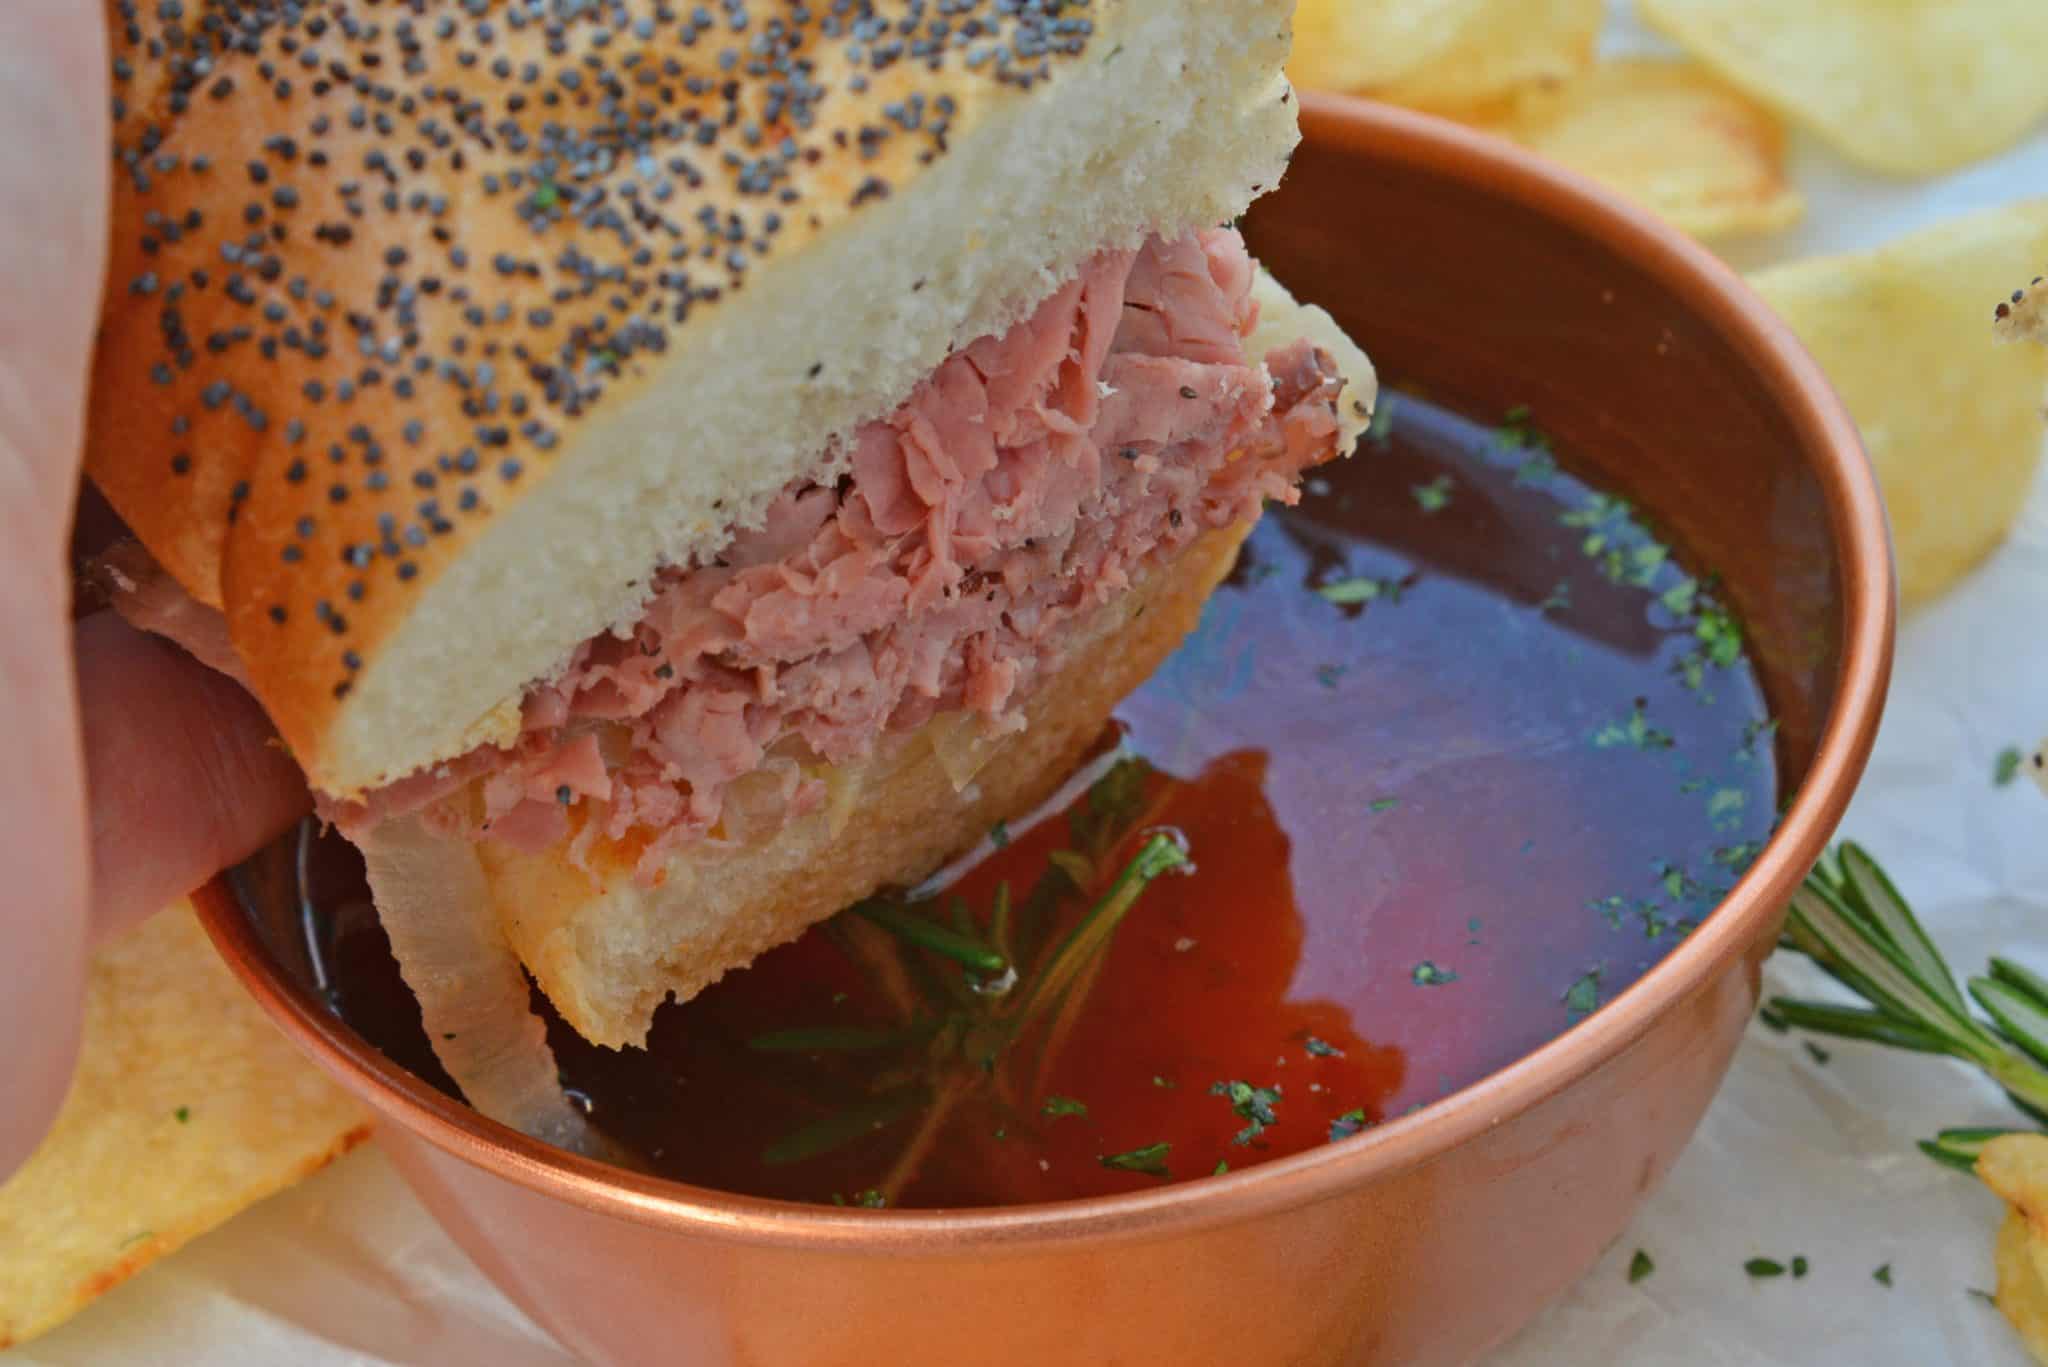 Easy French Dip Sandwiches are made from tender roast beef with caramelized onions, roasted garlic, whipped horseradish cream sauce on brioche rolls! #roastbeefsandwich #frenchdipsandwiches www.savoryexperiments.com